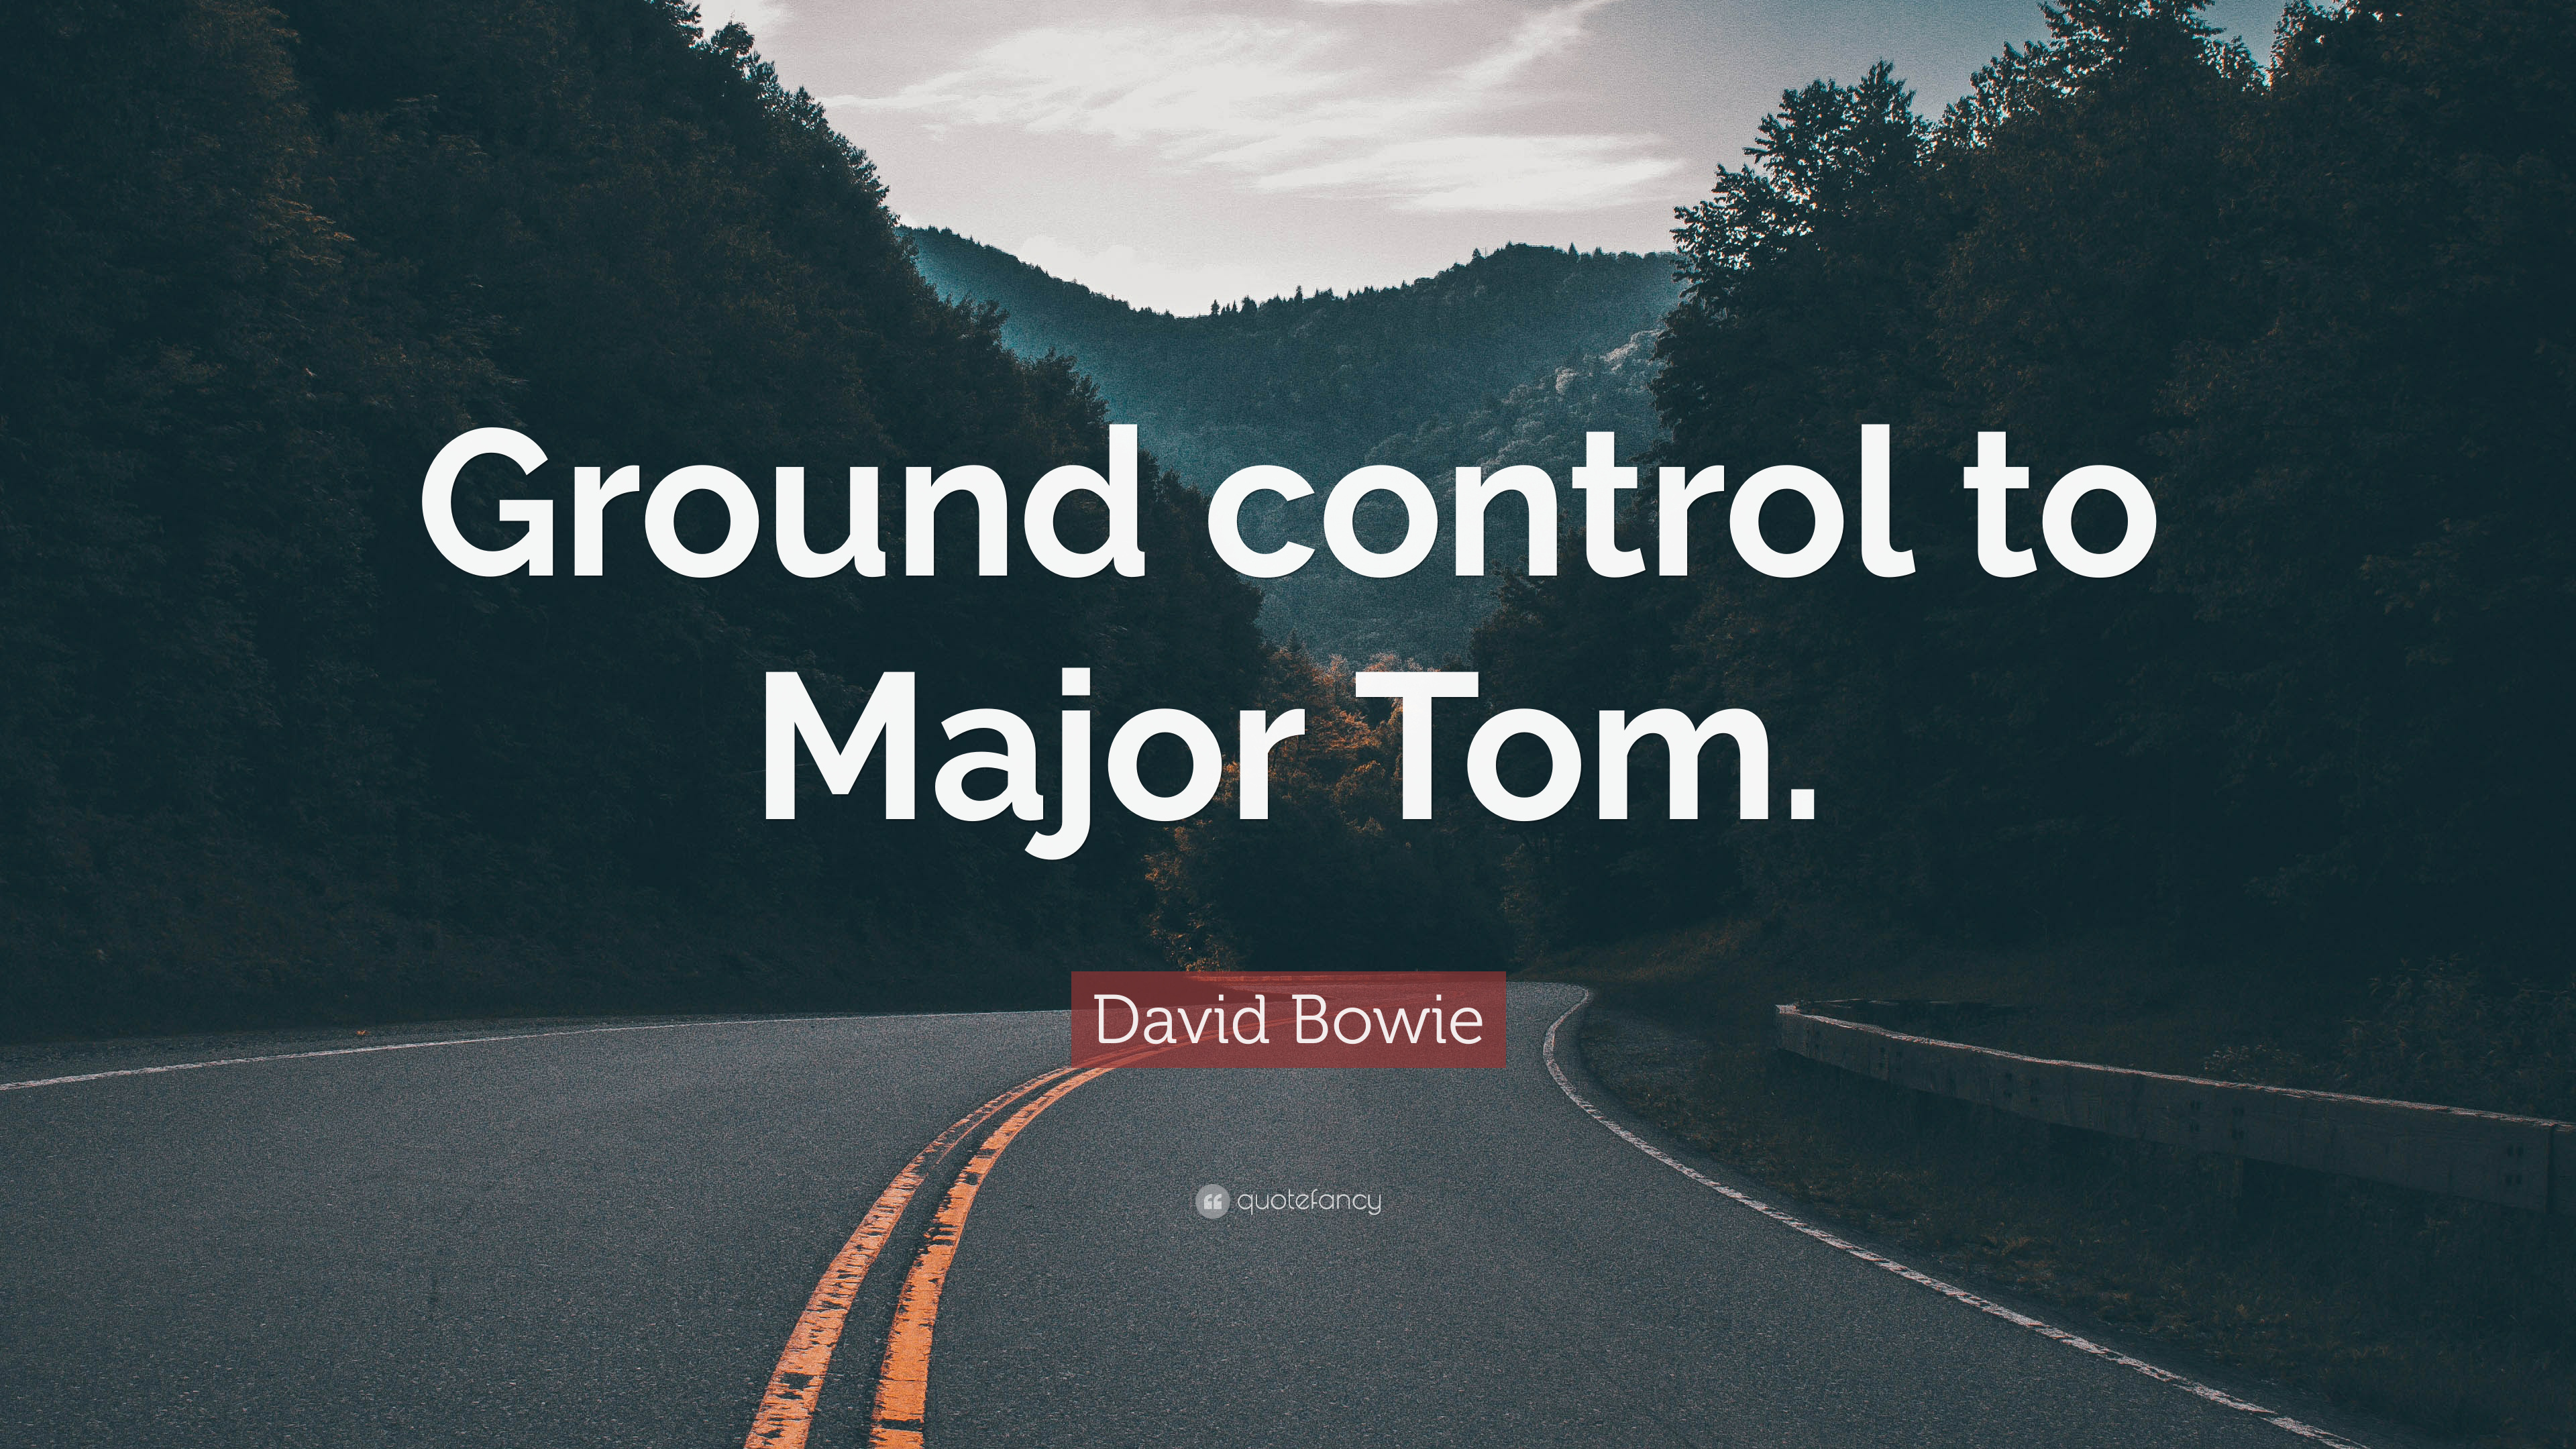 David Bowie Quote - Remember You Are Not Alone - HD Wallpaper 